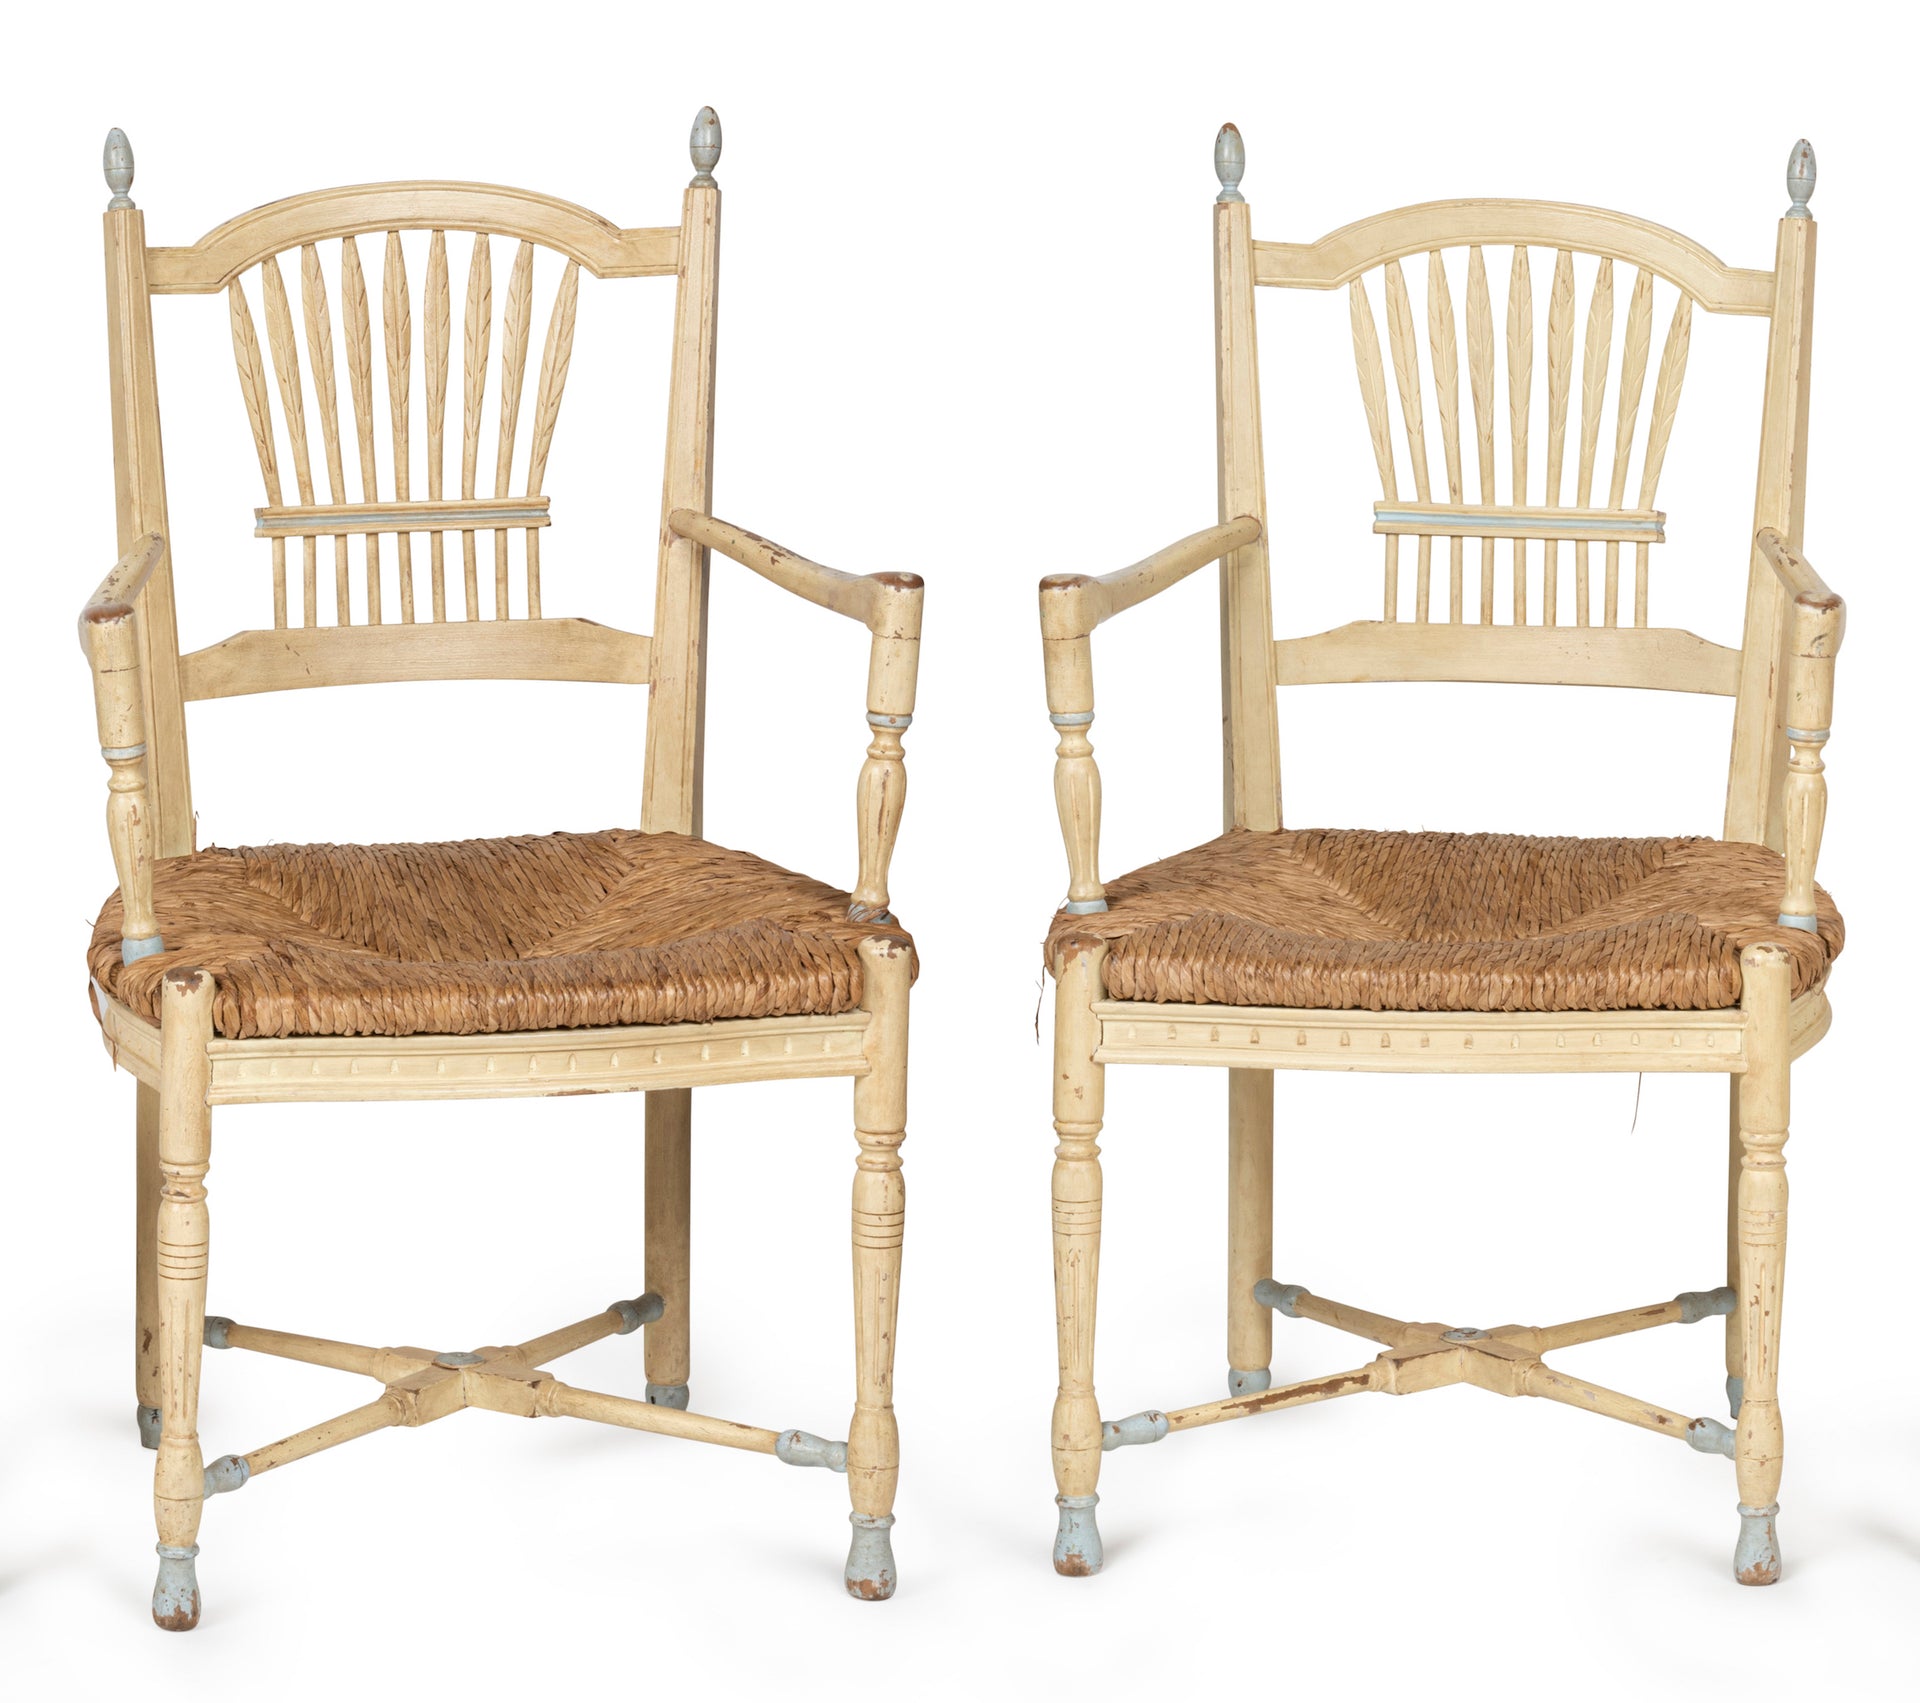 SOLD A set of six unusual painted timber Wheatsheaf design chairs, French Circa 1900